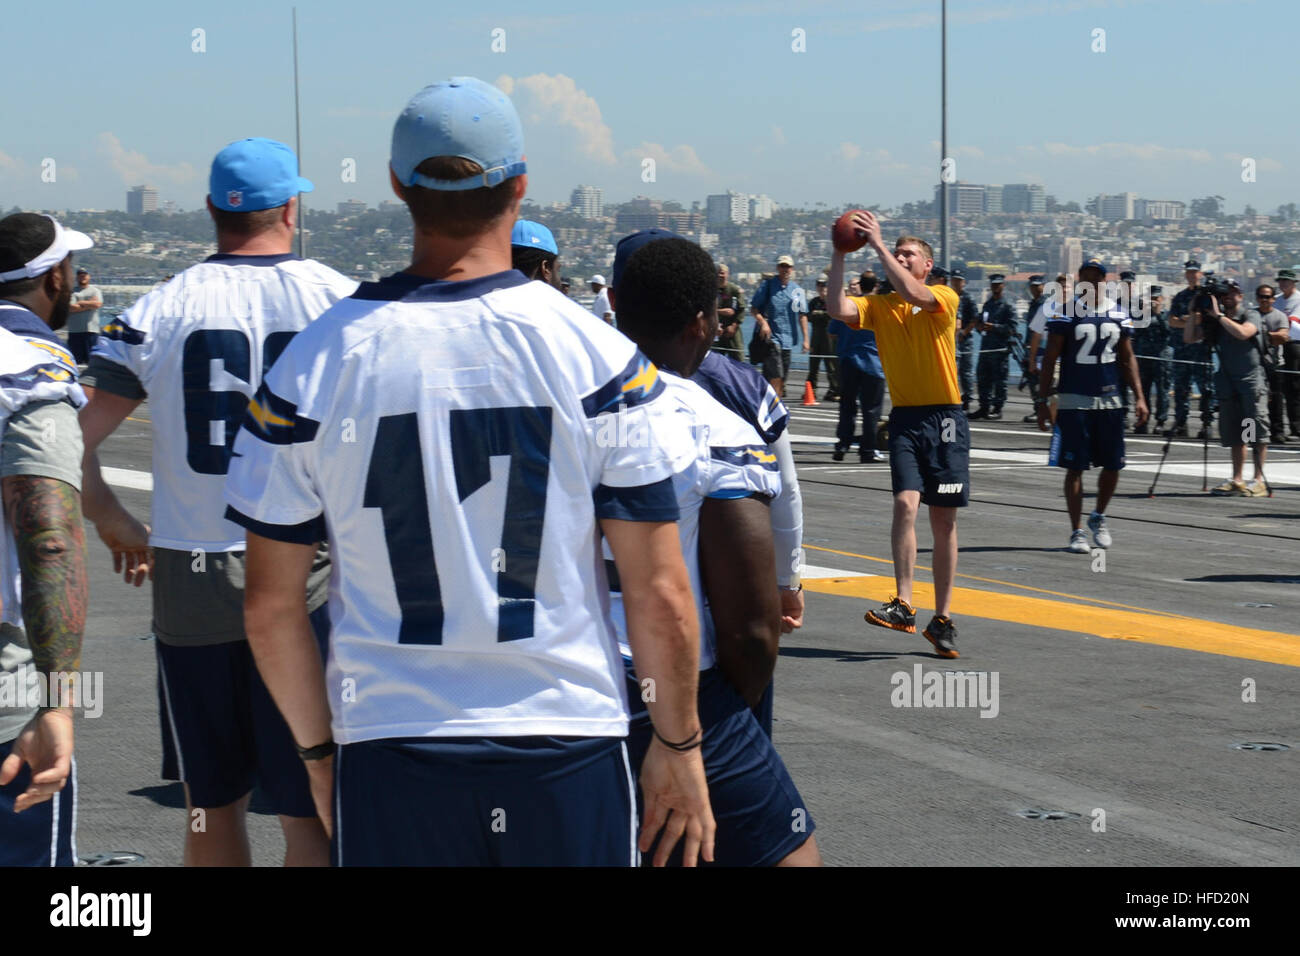 Sailors aboard the aircraft carrier USS Ronald Reagan (CVN 76) catch passes from San Diego Chargers quarterback Philip Rivers during a simulated practice on the flight deck. Ronald Reagan is currently moored and home-ported at Naval Base Coronado. (U.S. Navy photo by Mass Communication Specialist 3rd Class Timothy Schumaker/Released) San Diego Chargers visit USS Ronald Reagan 130828-N-UK306-234 Stock Photo